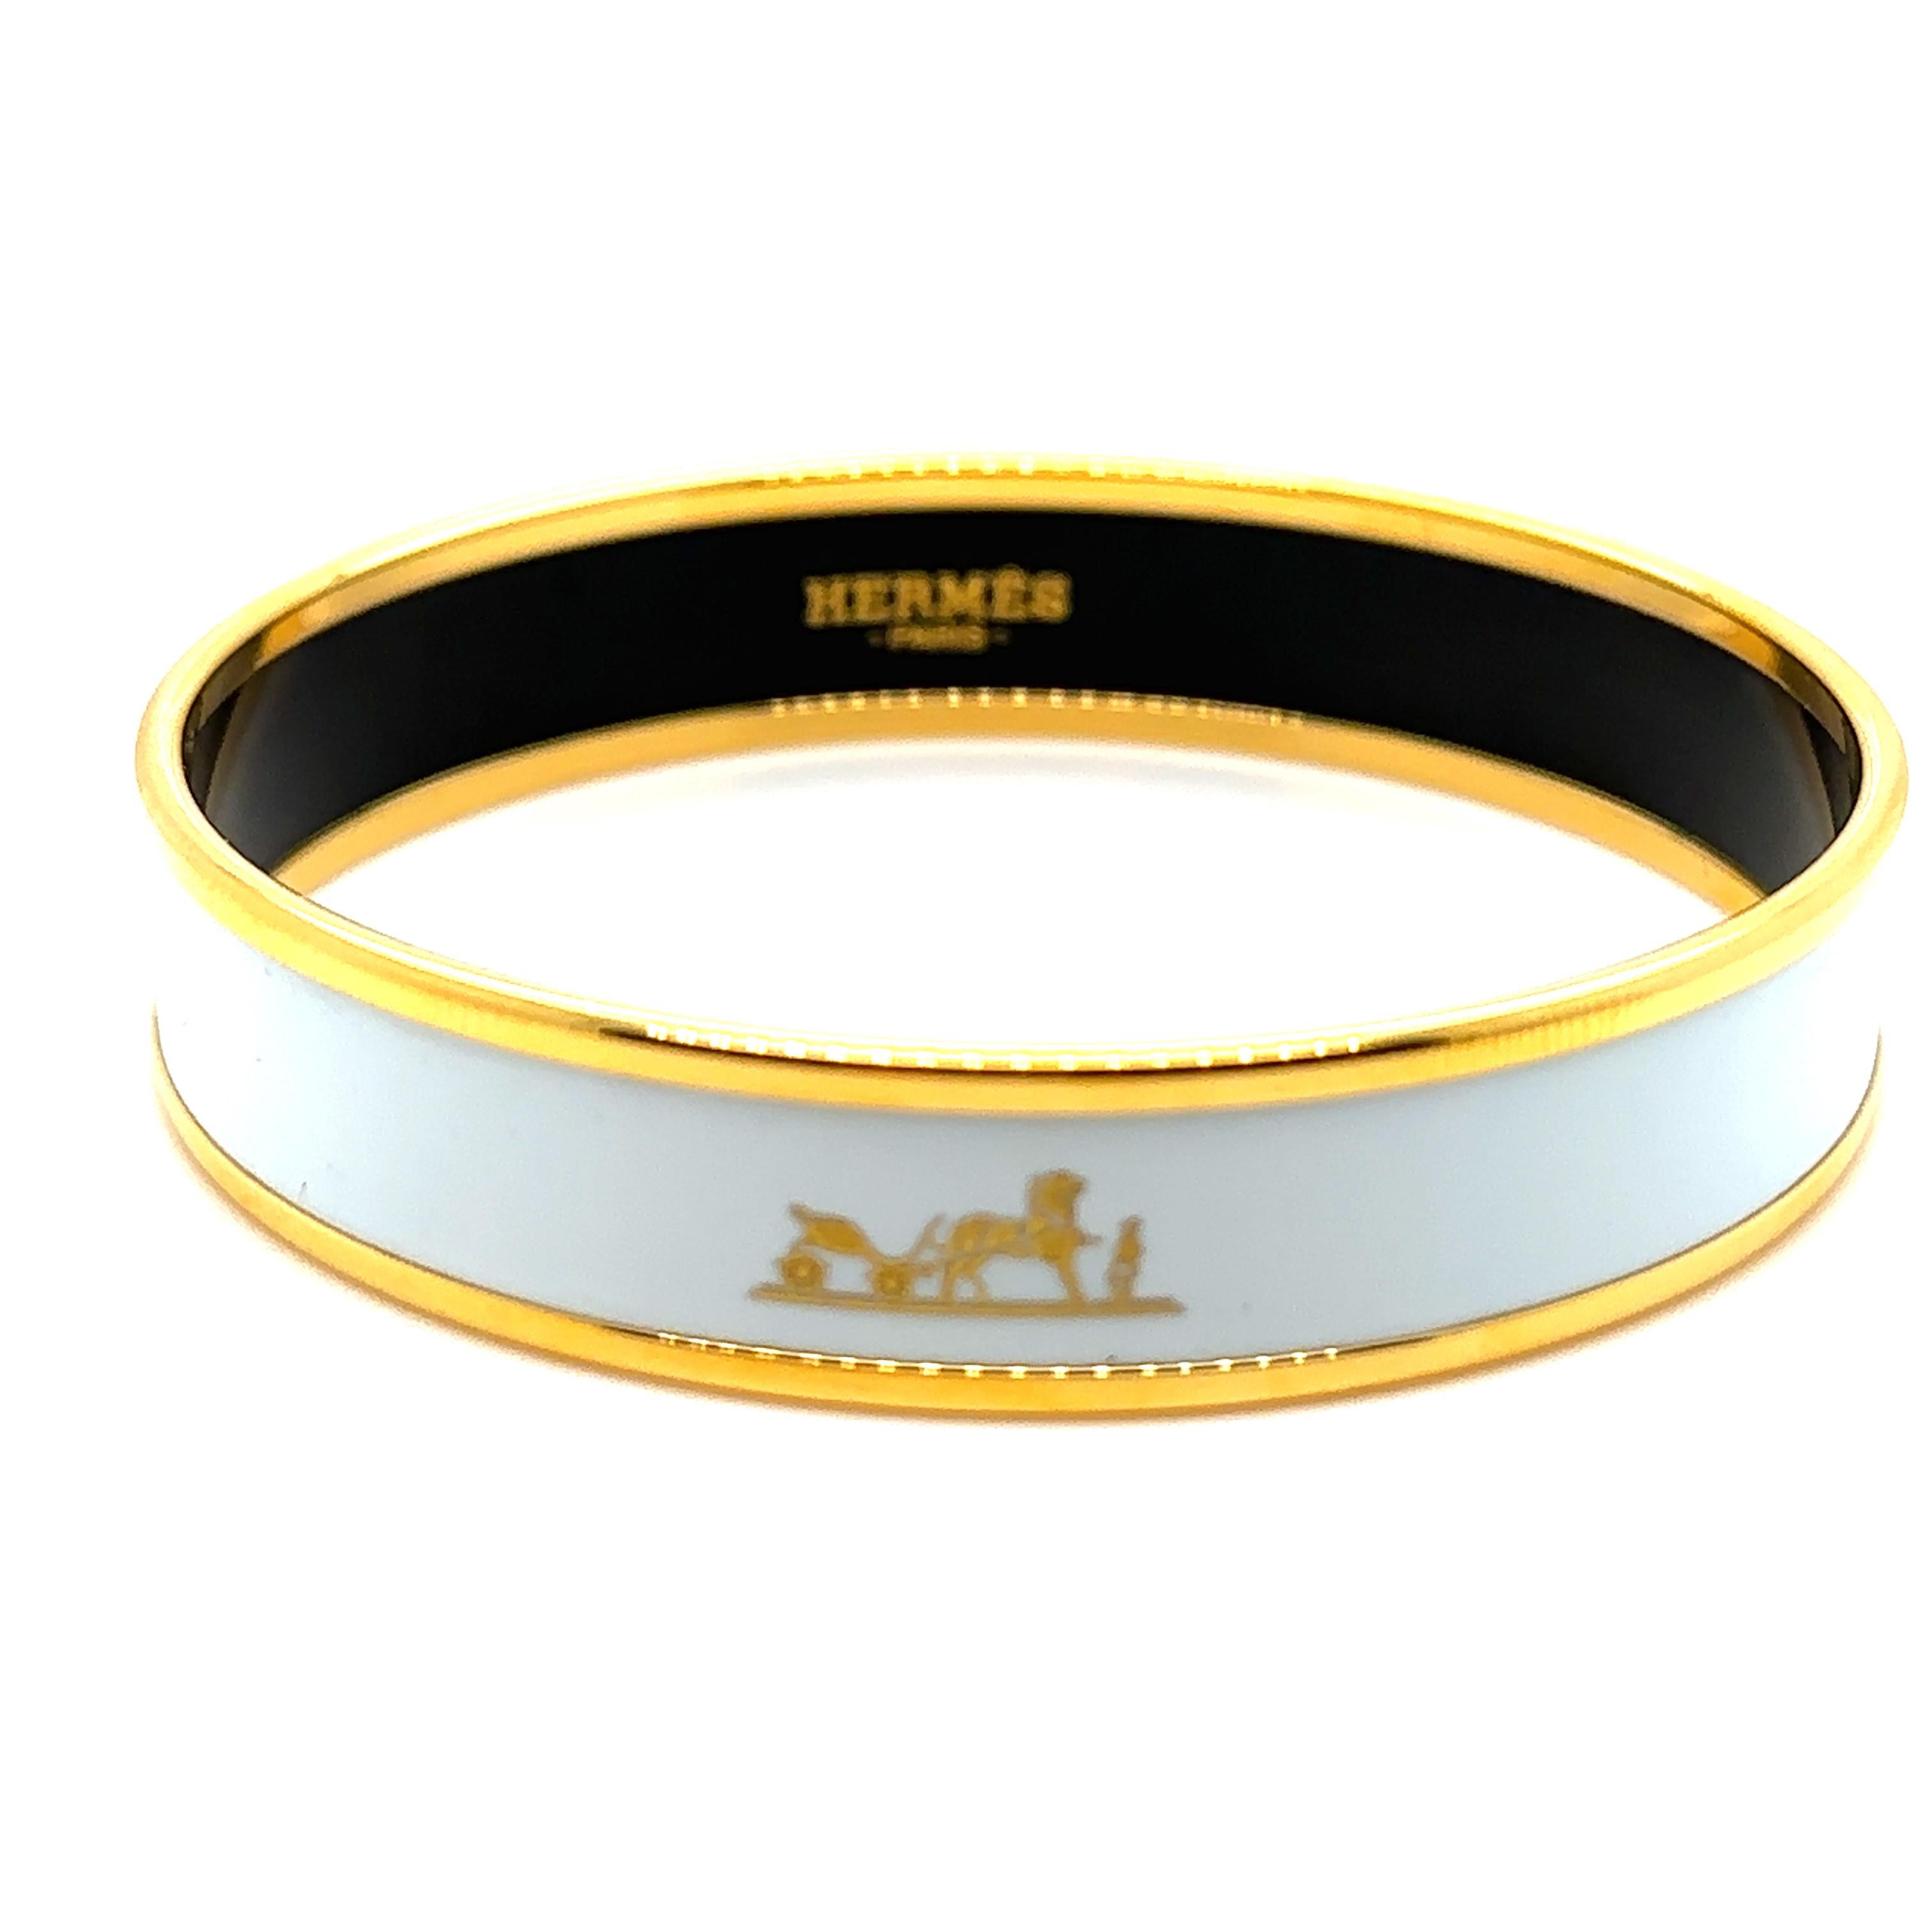 Unique features: 

A Hermes Uni bangle in enamel with gold-plated hardware

Made in France

Interior diameter: 6.3 cm  Width: 11 mm

Metal: Gold Plated
Carat: N/A
Colour: N/A
Clarity:  N/A
Cut: N/A 
Weight: 24.9g
Engravings/Markings: Signed HERMES